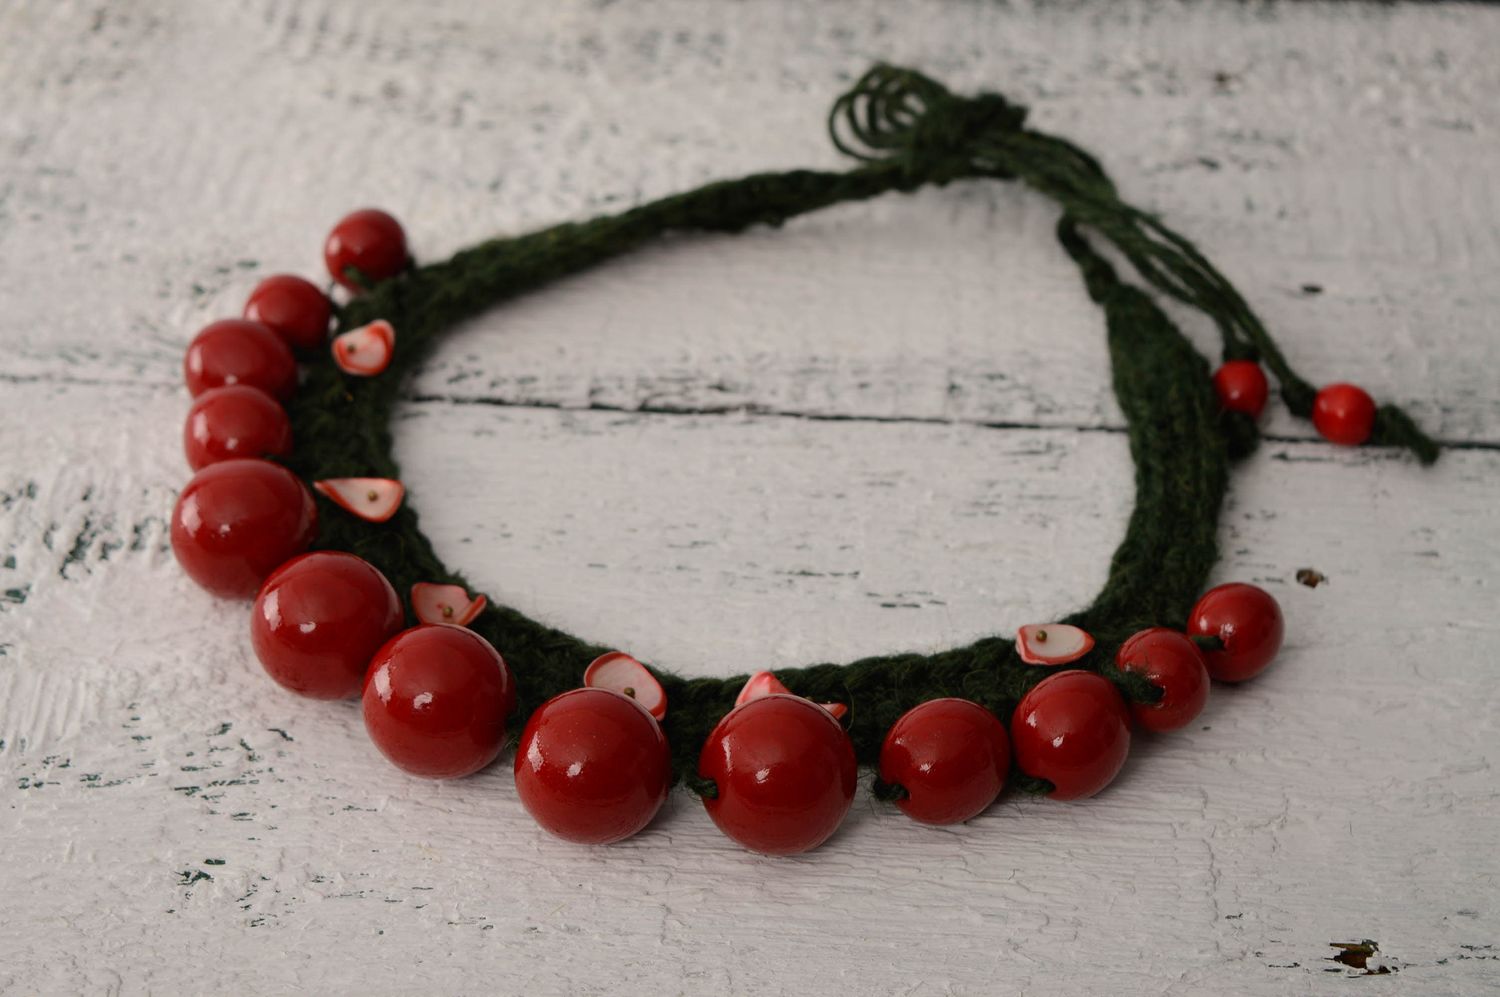 Crochet necklace in eco style photo 4